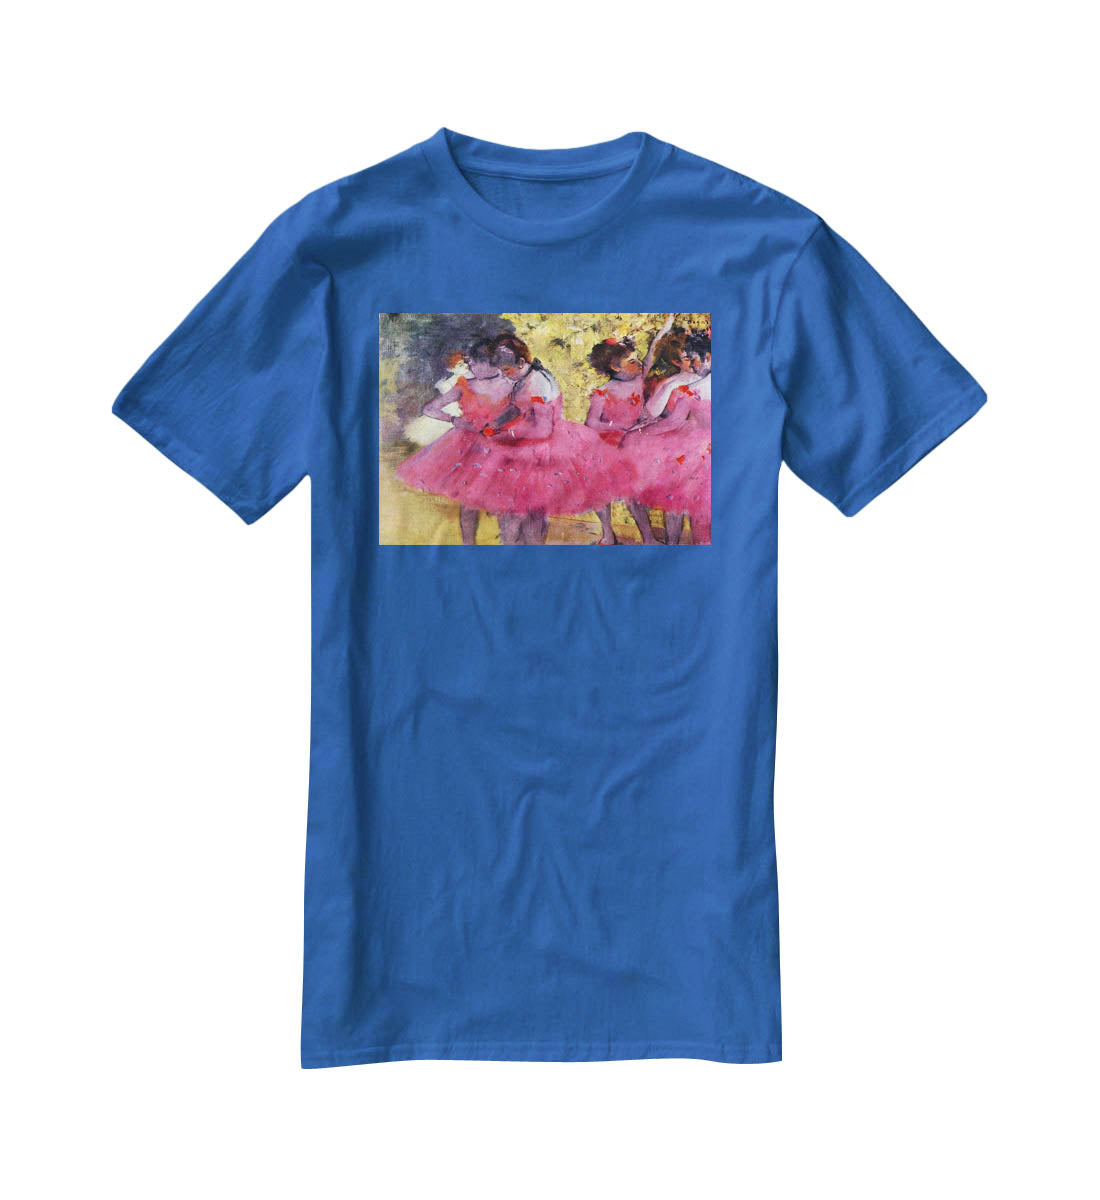 Dancers in pink between the scenes by Degas T-Shirt - Canvas Art Rocks - 2